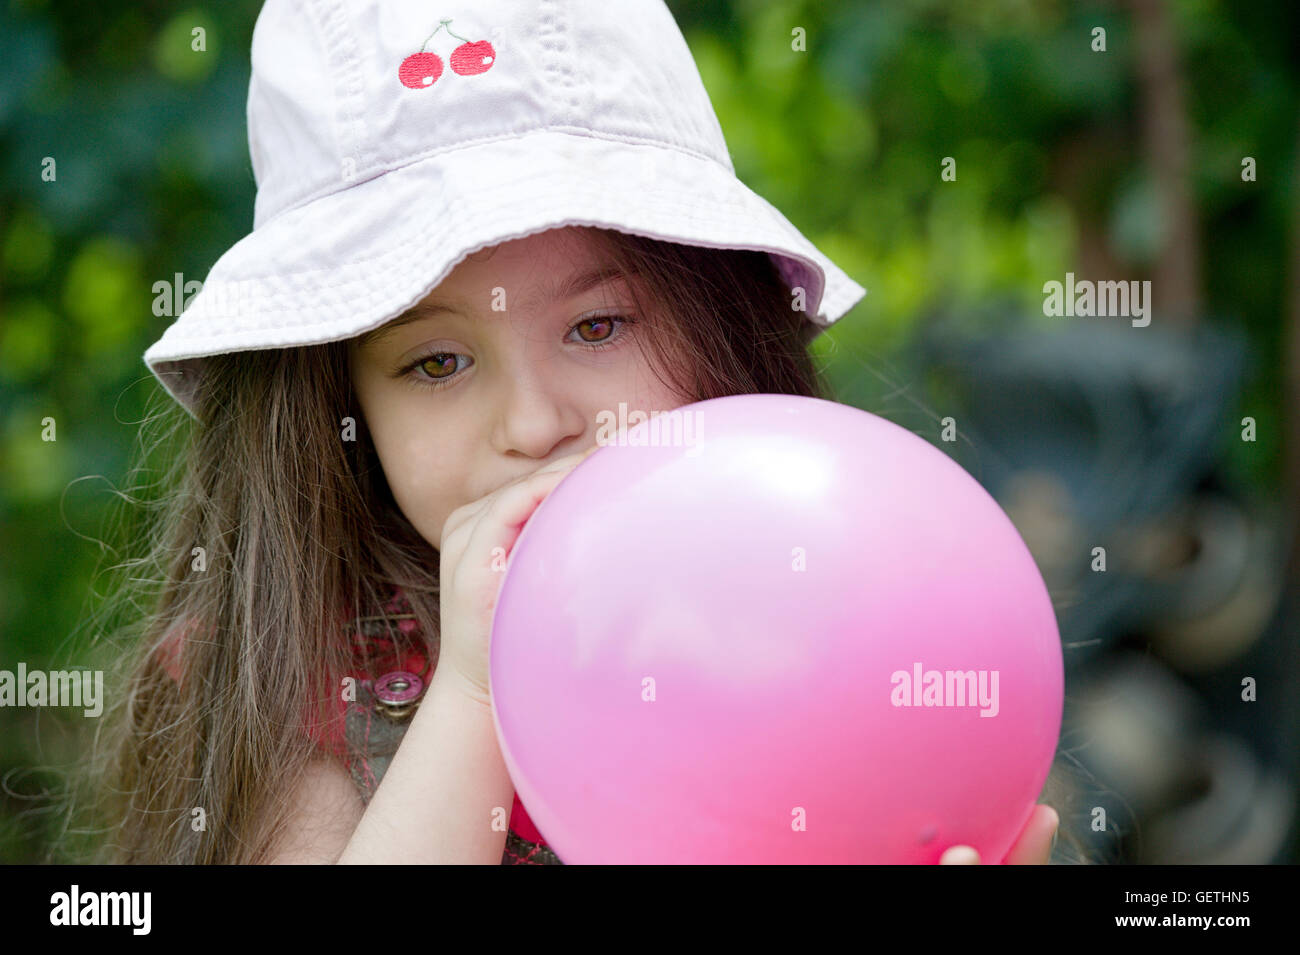 Portrait of Girl Blowing up balloon Banque D'Images